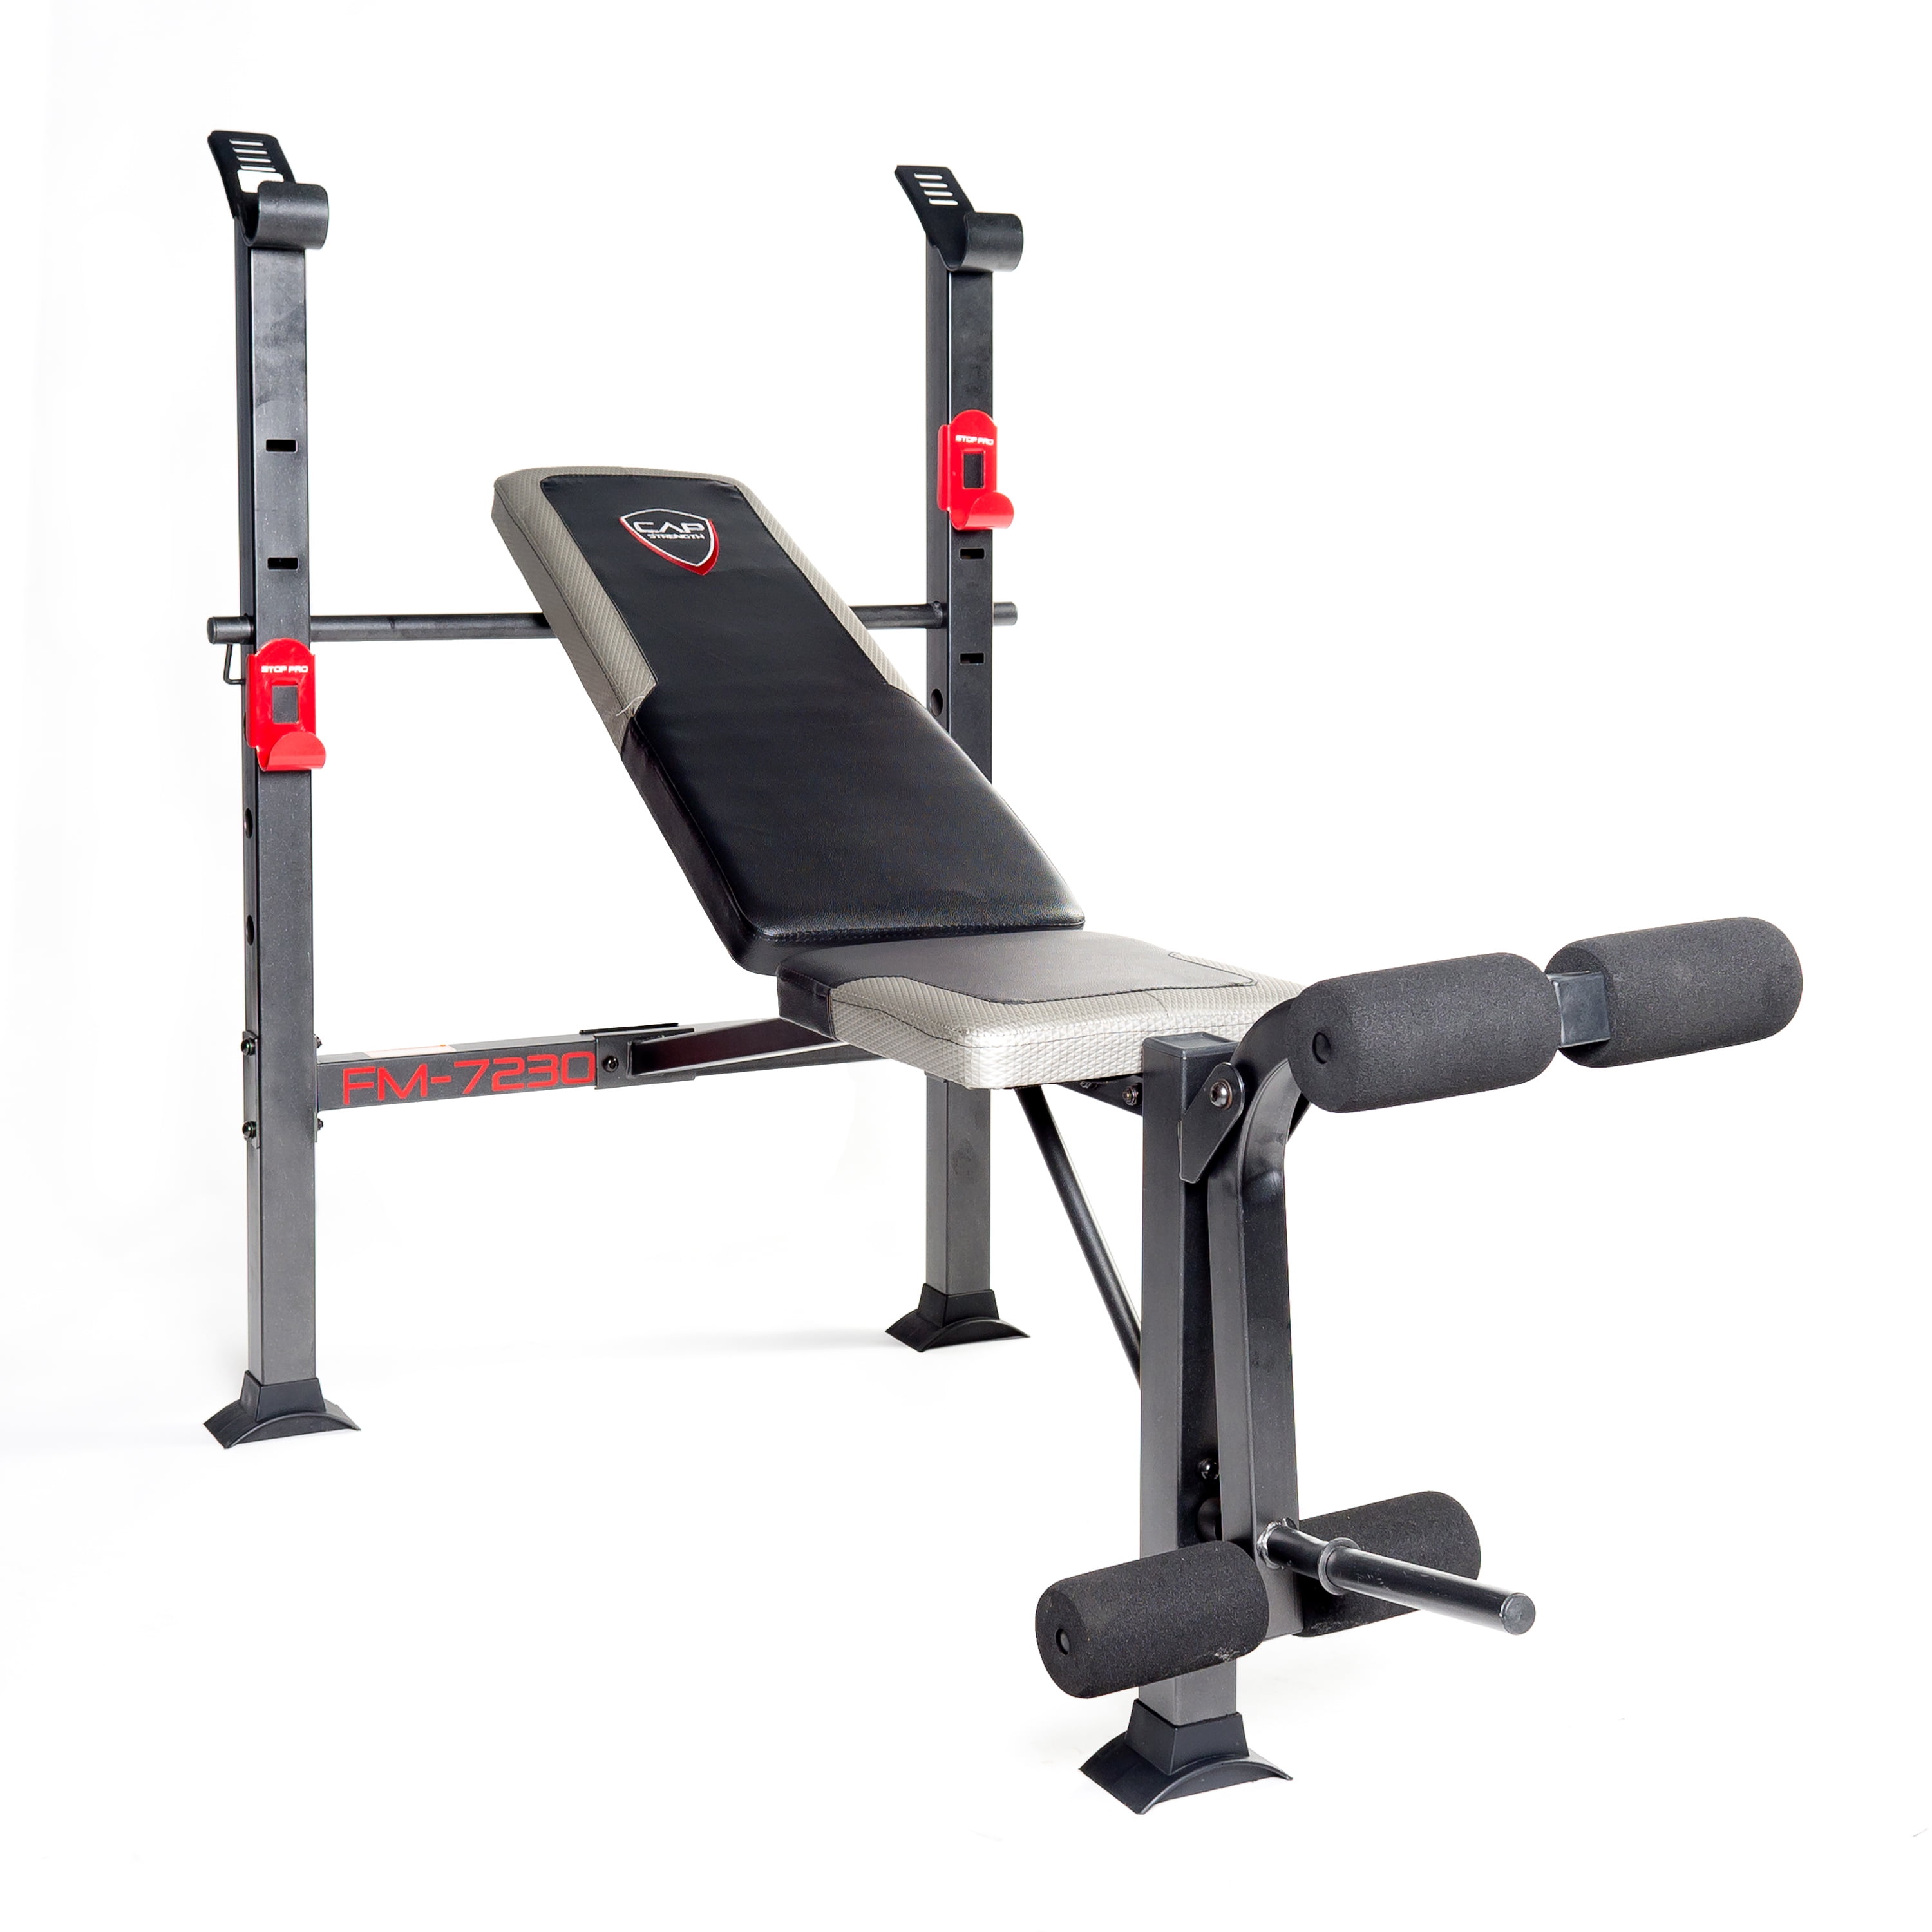 Weider WEBE60610 6.1 Multi-Position Weight Bench with Leg Developer and Exercise Chart for sale online 